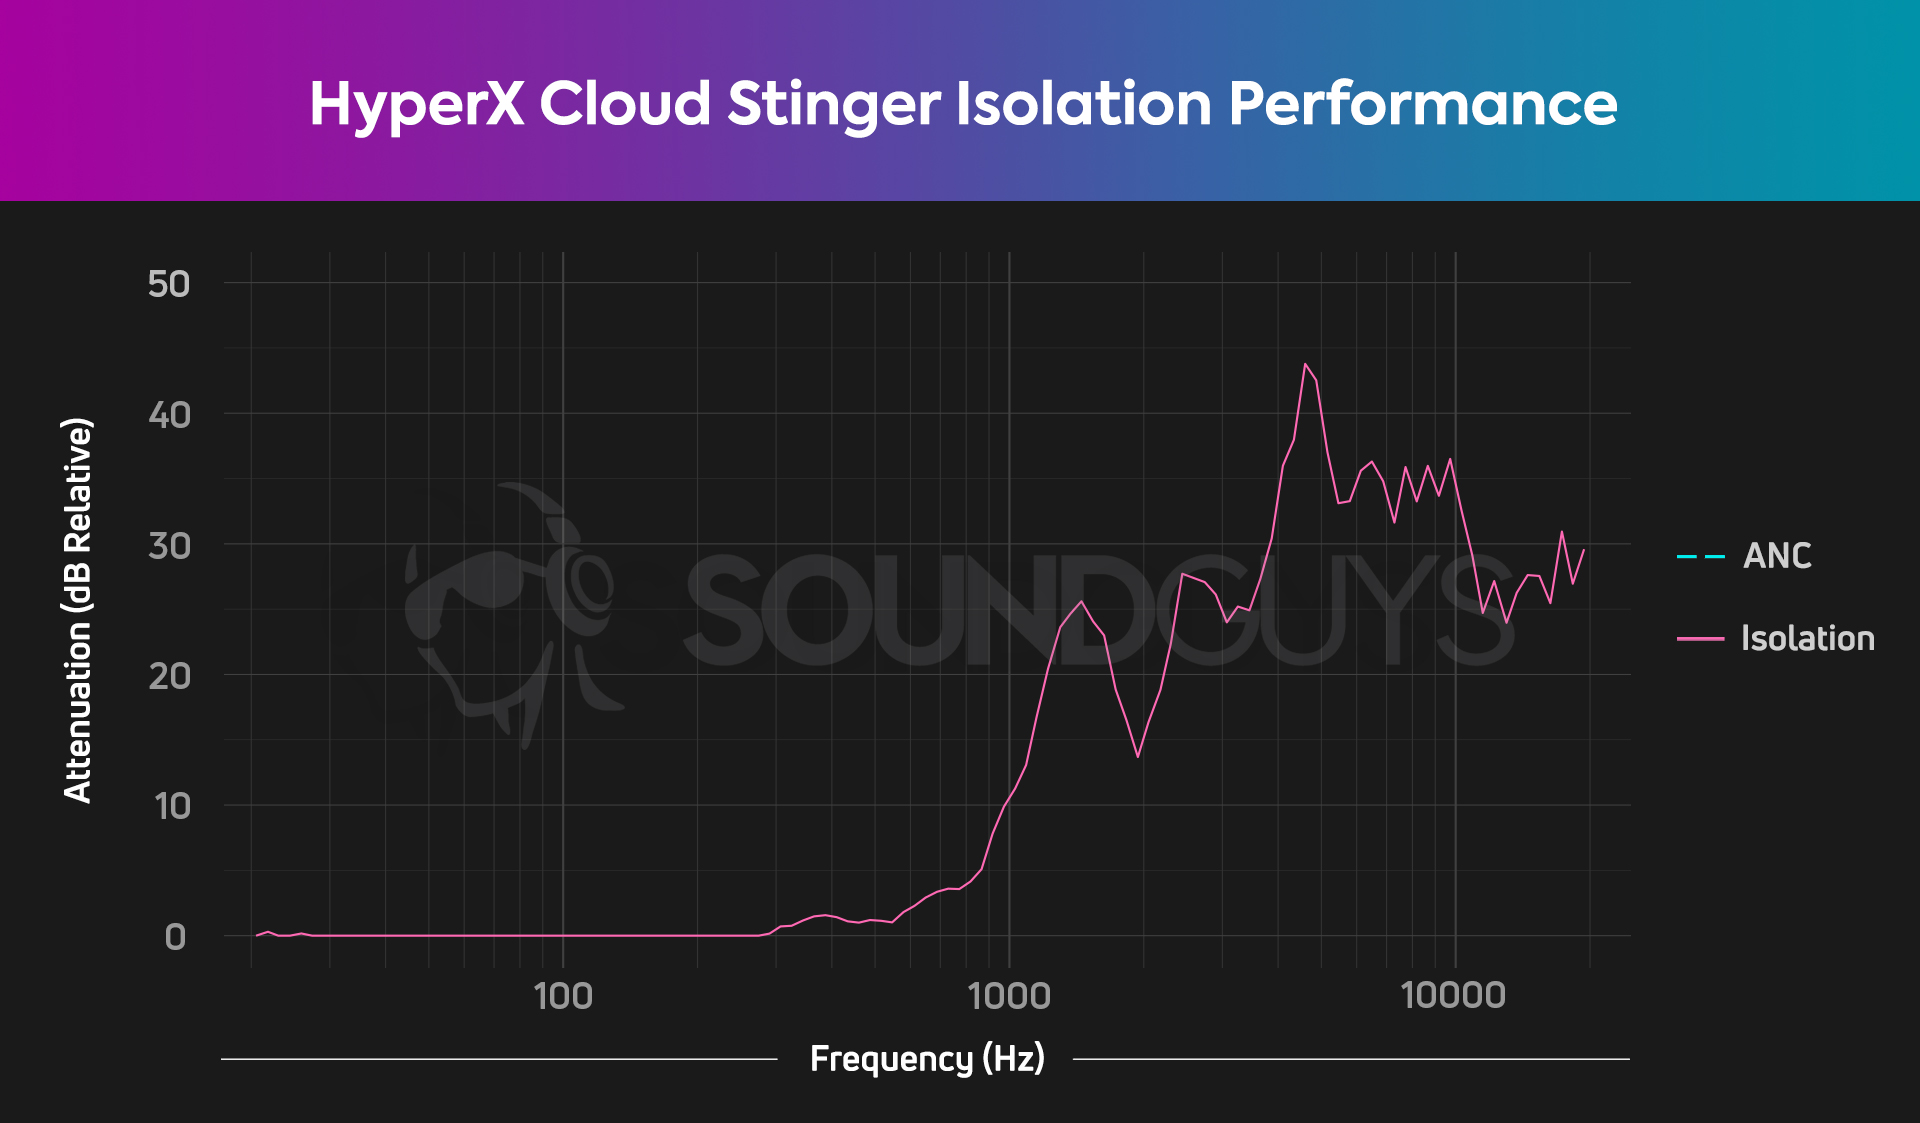 An isolation chart for the HyperX Cloud Stinger gaming headset, which shows very average isolation performance